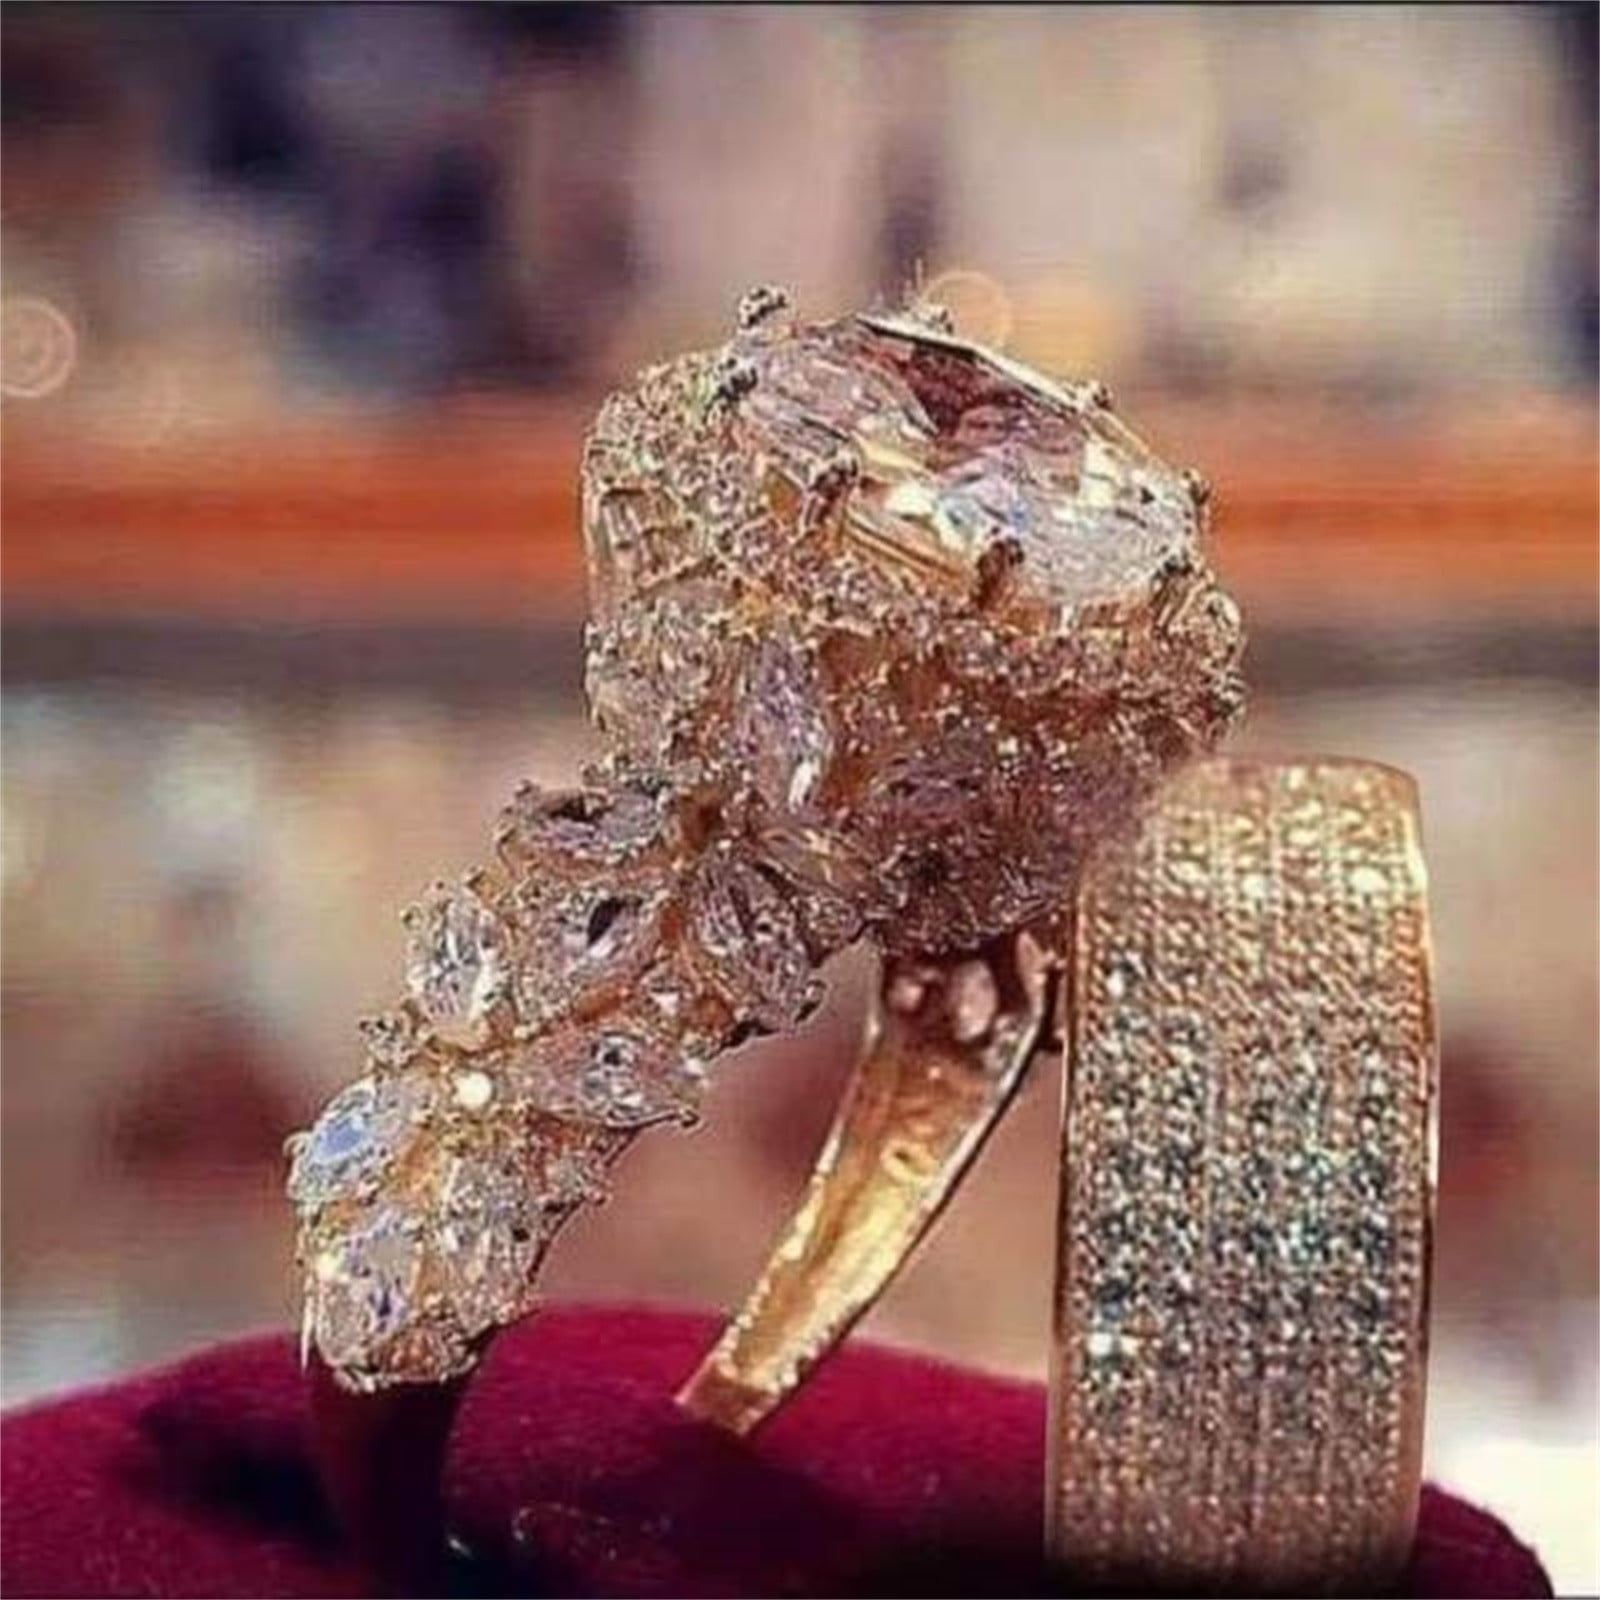 World Most Beautiful Expensive Wedding Rings Pics | Beautiful wedding rings  diamonds, Most beautiful engagement rings, Expensive wedding rings